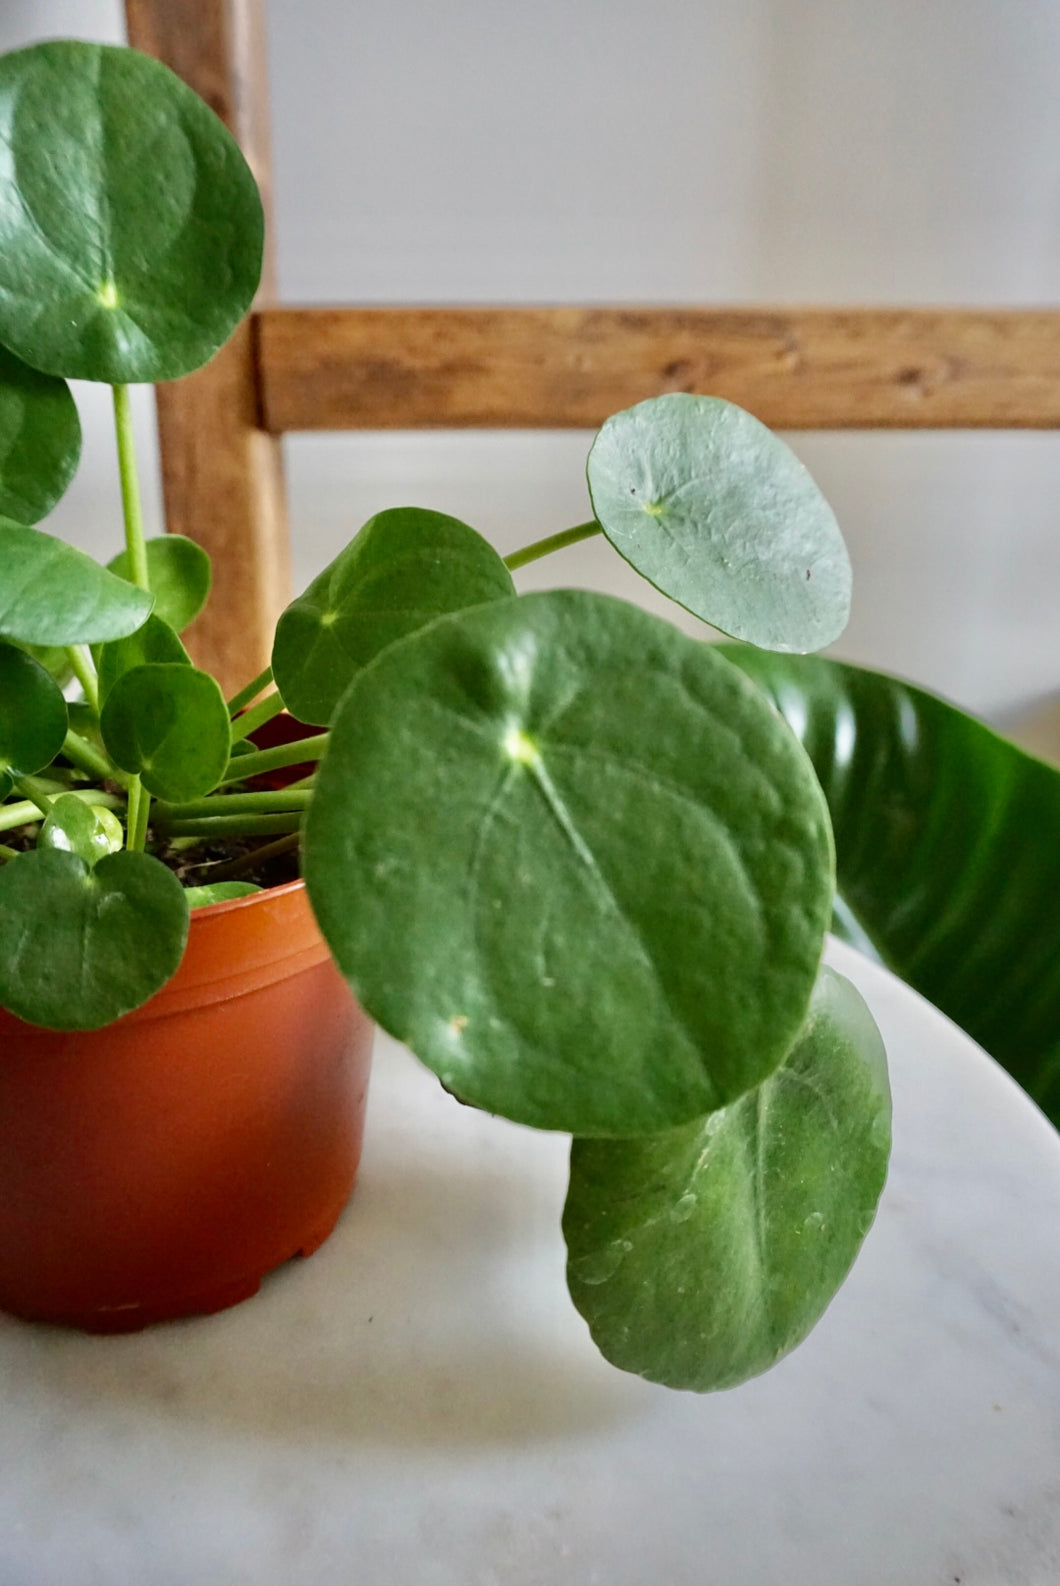 Pilea peperomioides 'Chinese Money Plant'